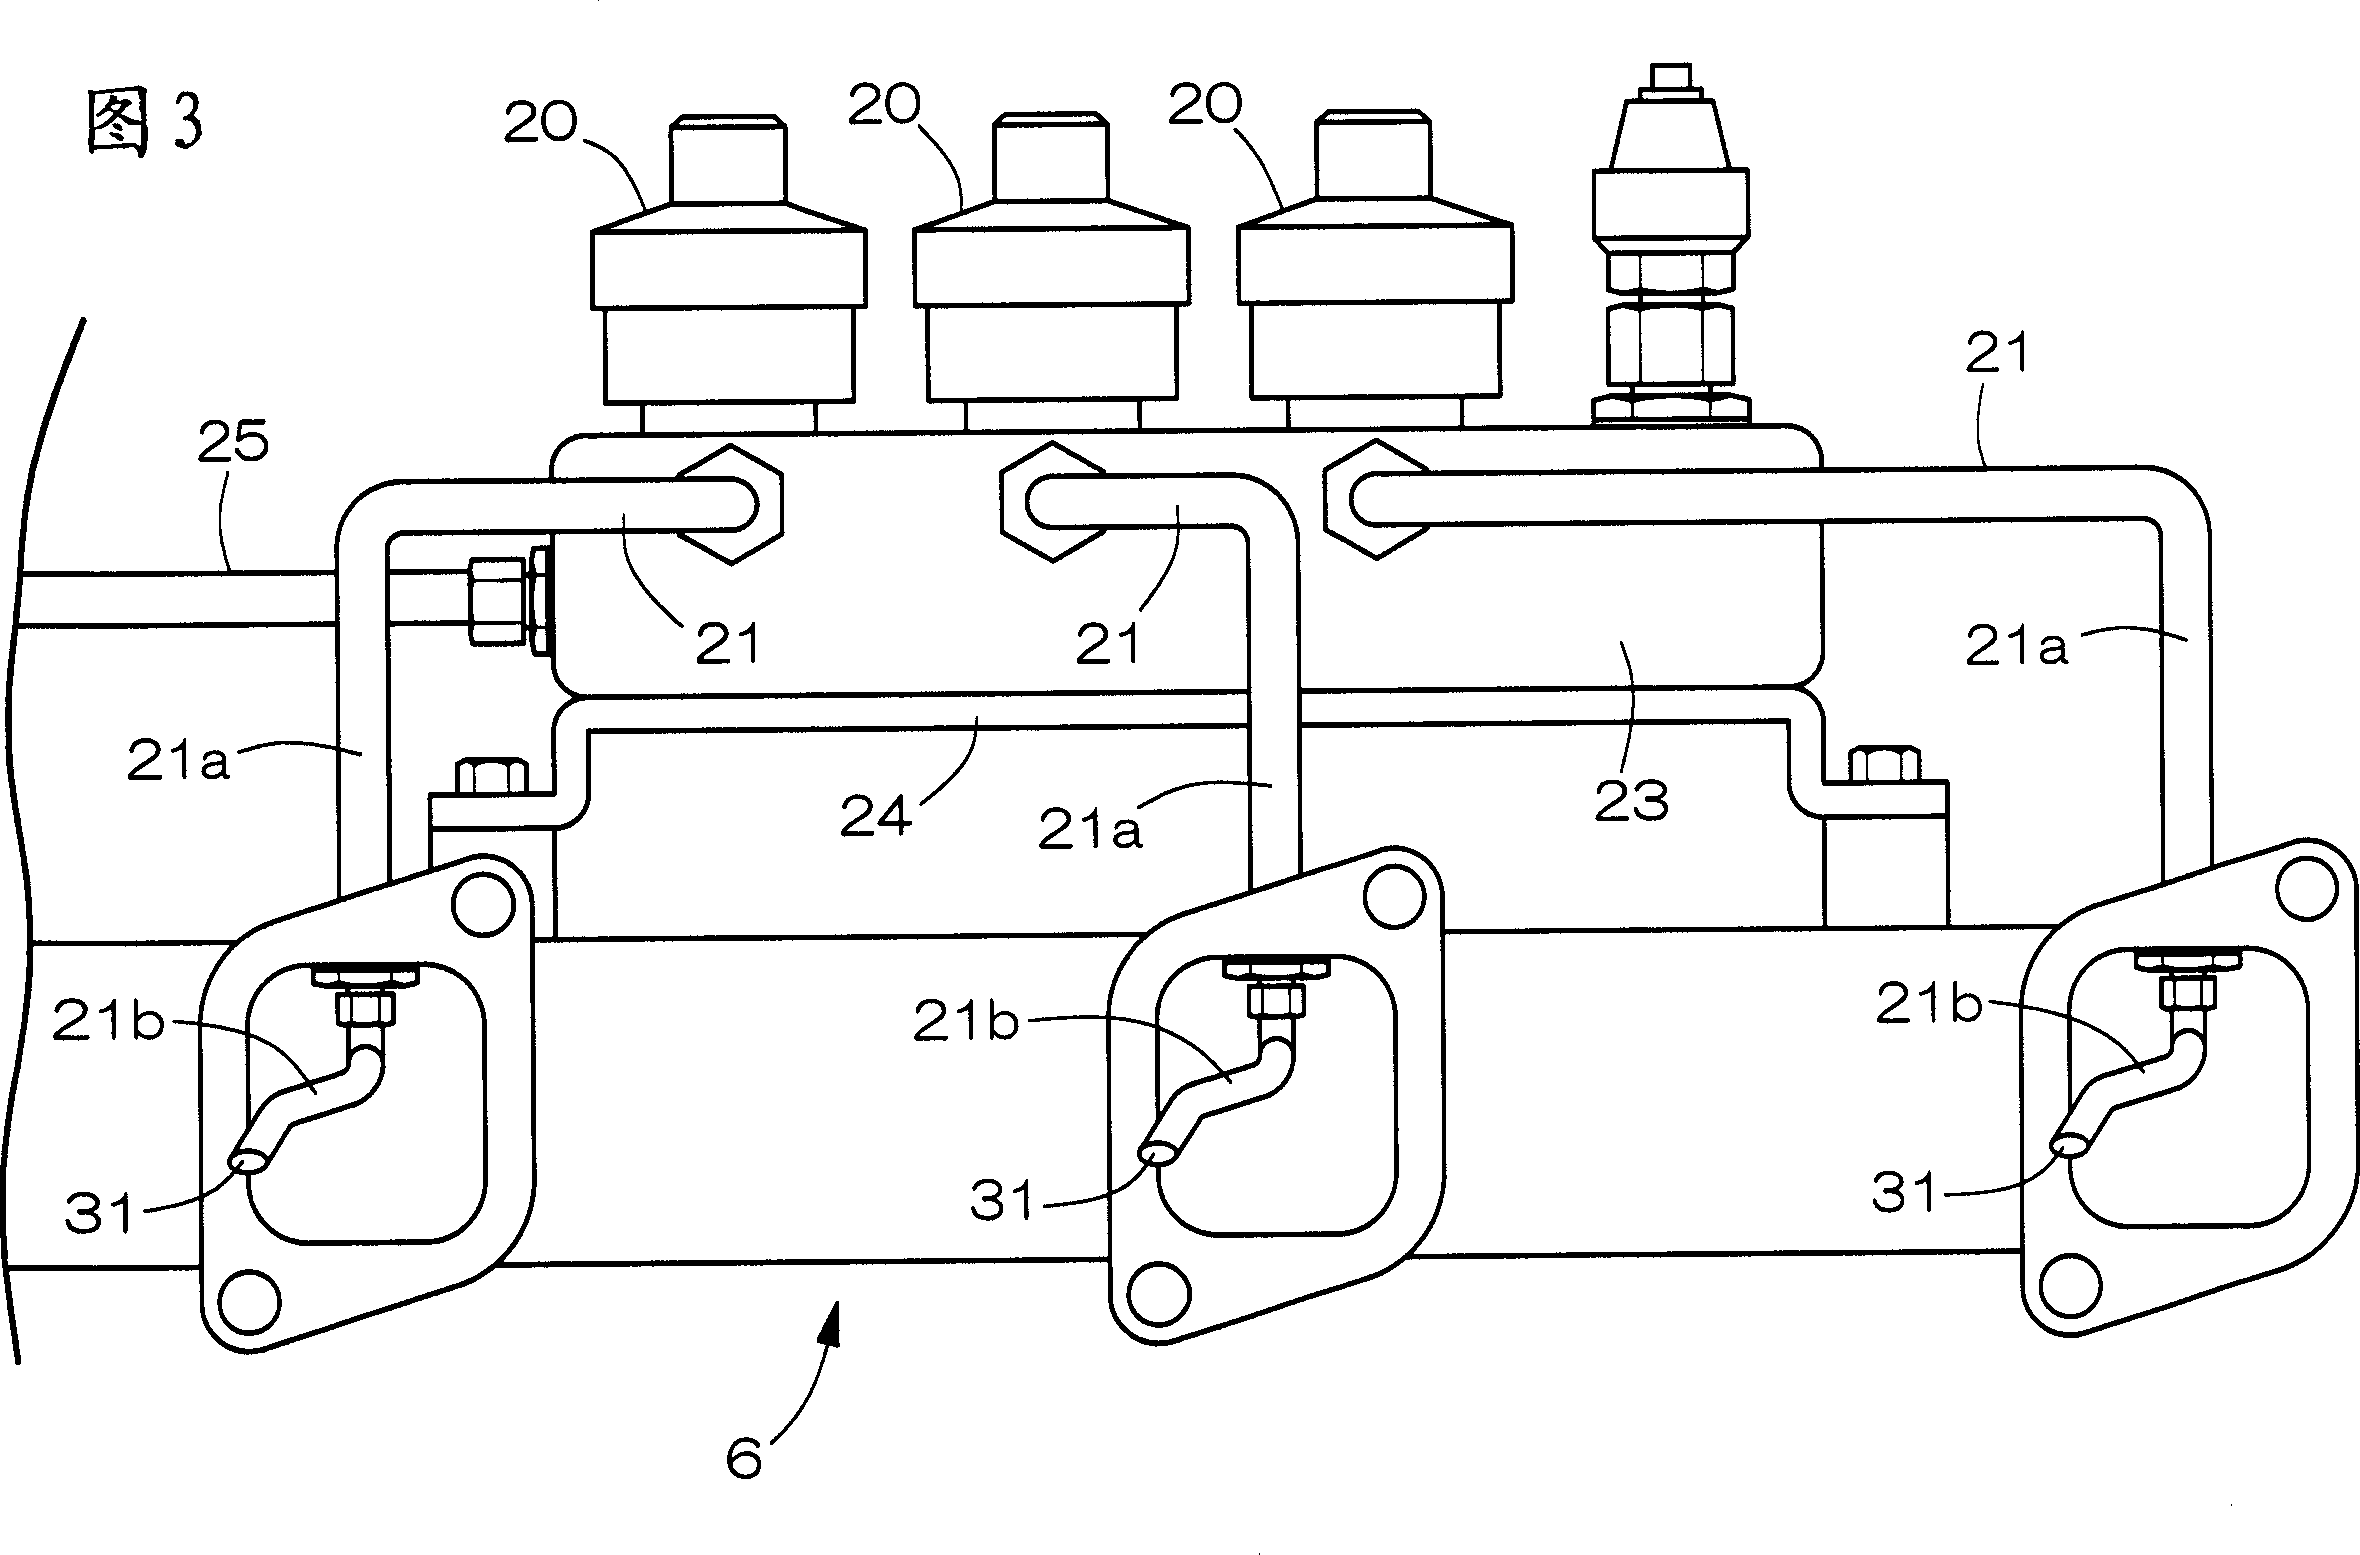 Dual-fuel internal cobustion engine using gas fuel at the same time